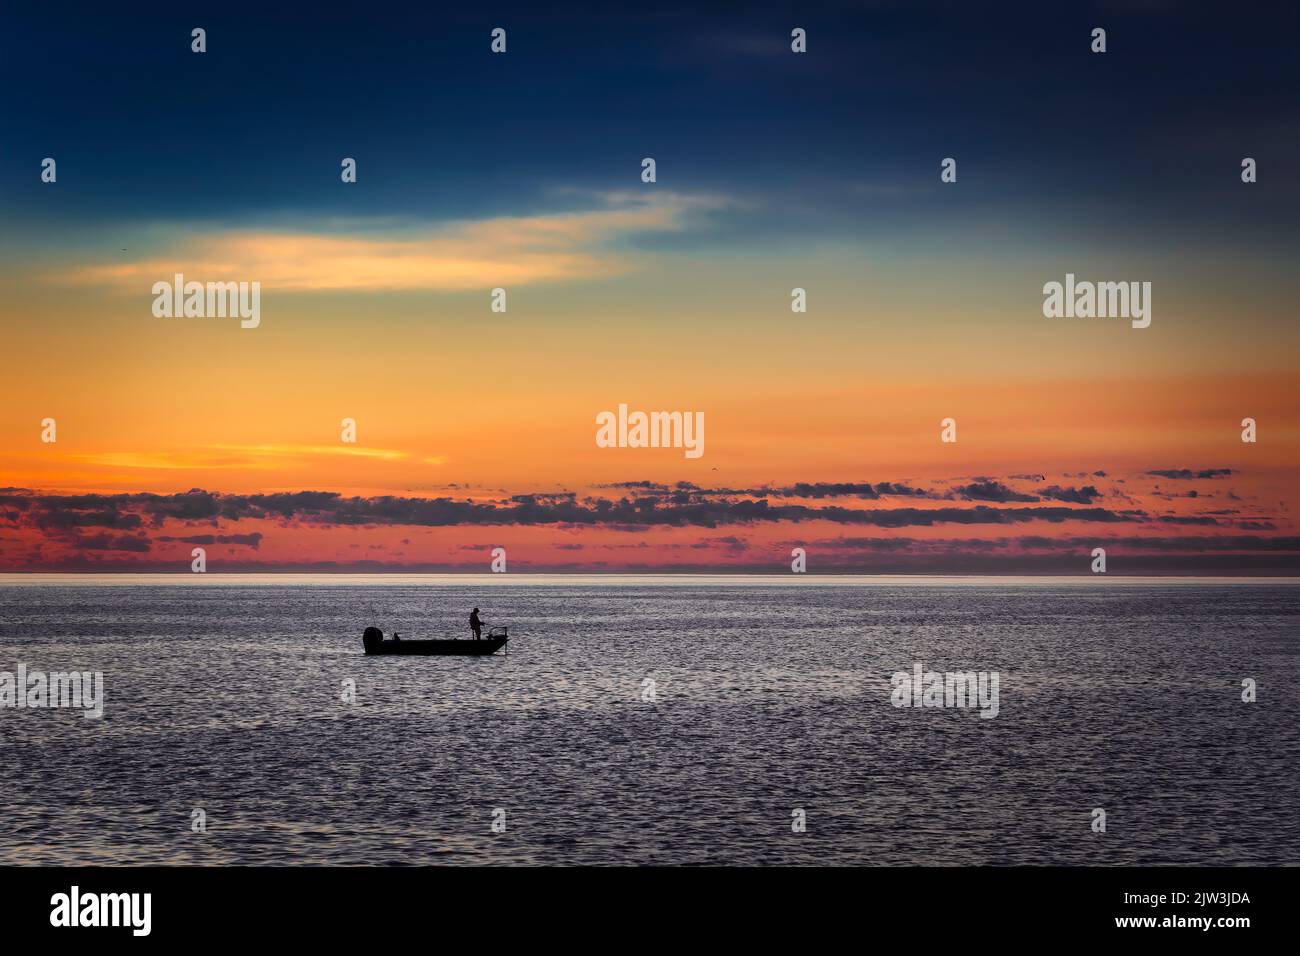 The morning sun is about to rise behind a fisherman in his boat on Lake Michigan off the coast of Manitowoc, Wisconsin. Stock Photo